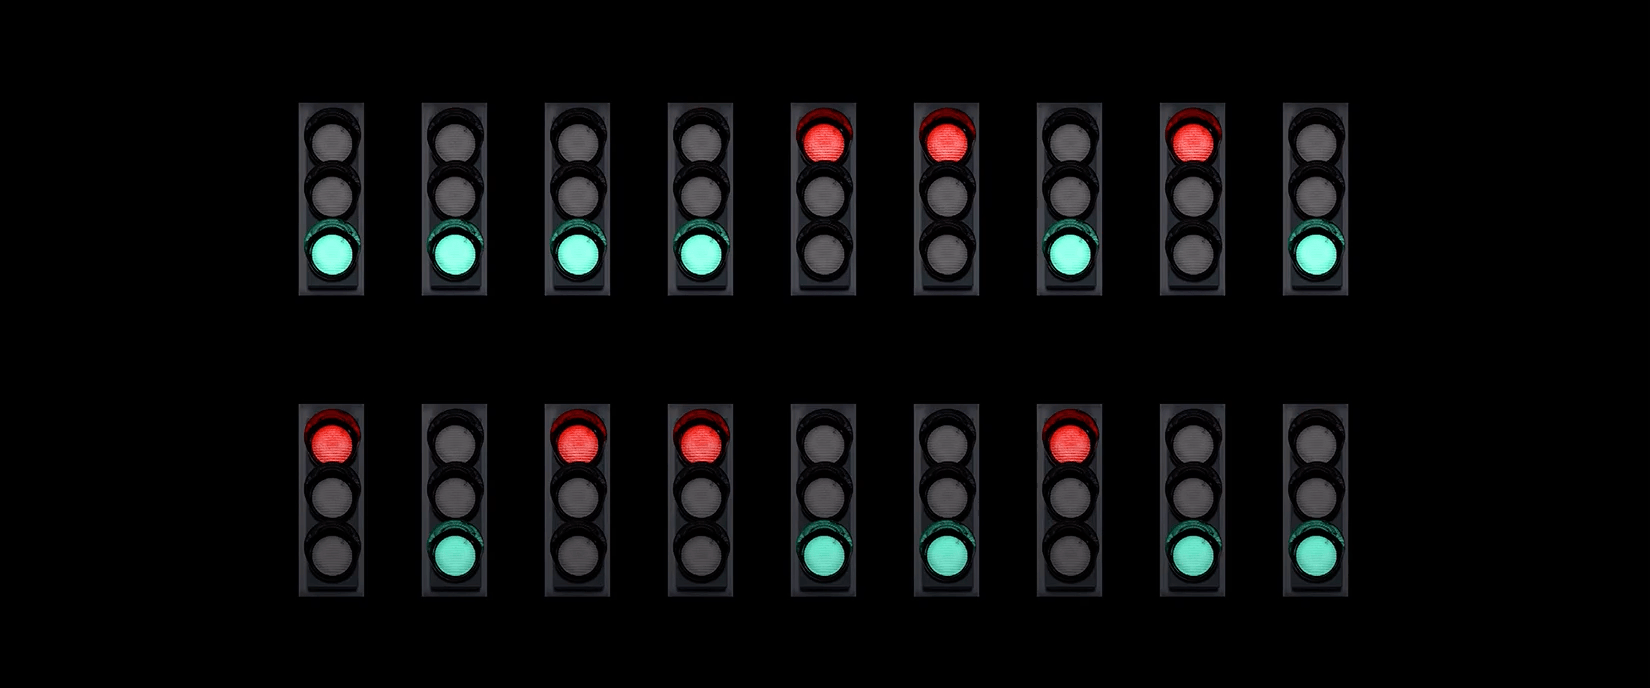 Animated gif of two rows of traffic lights. The lights are intermittently switching from green to red.